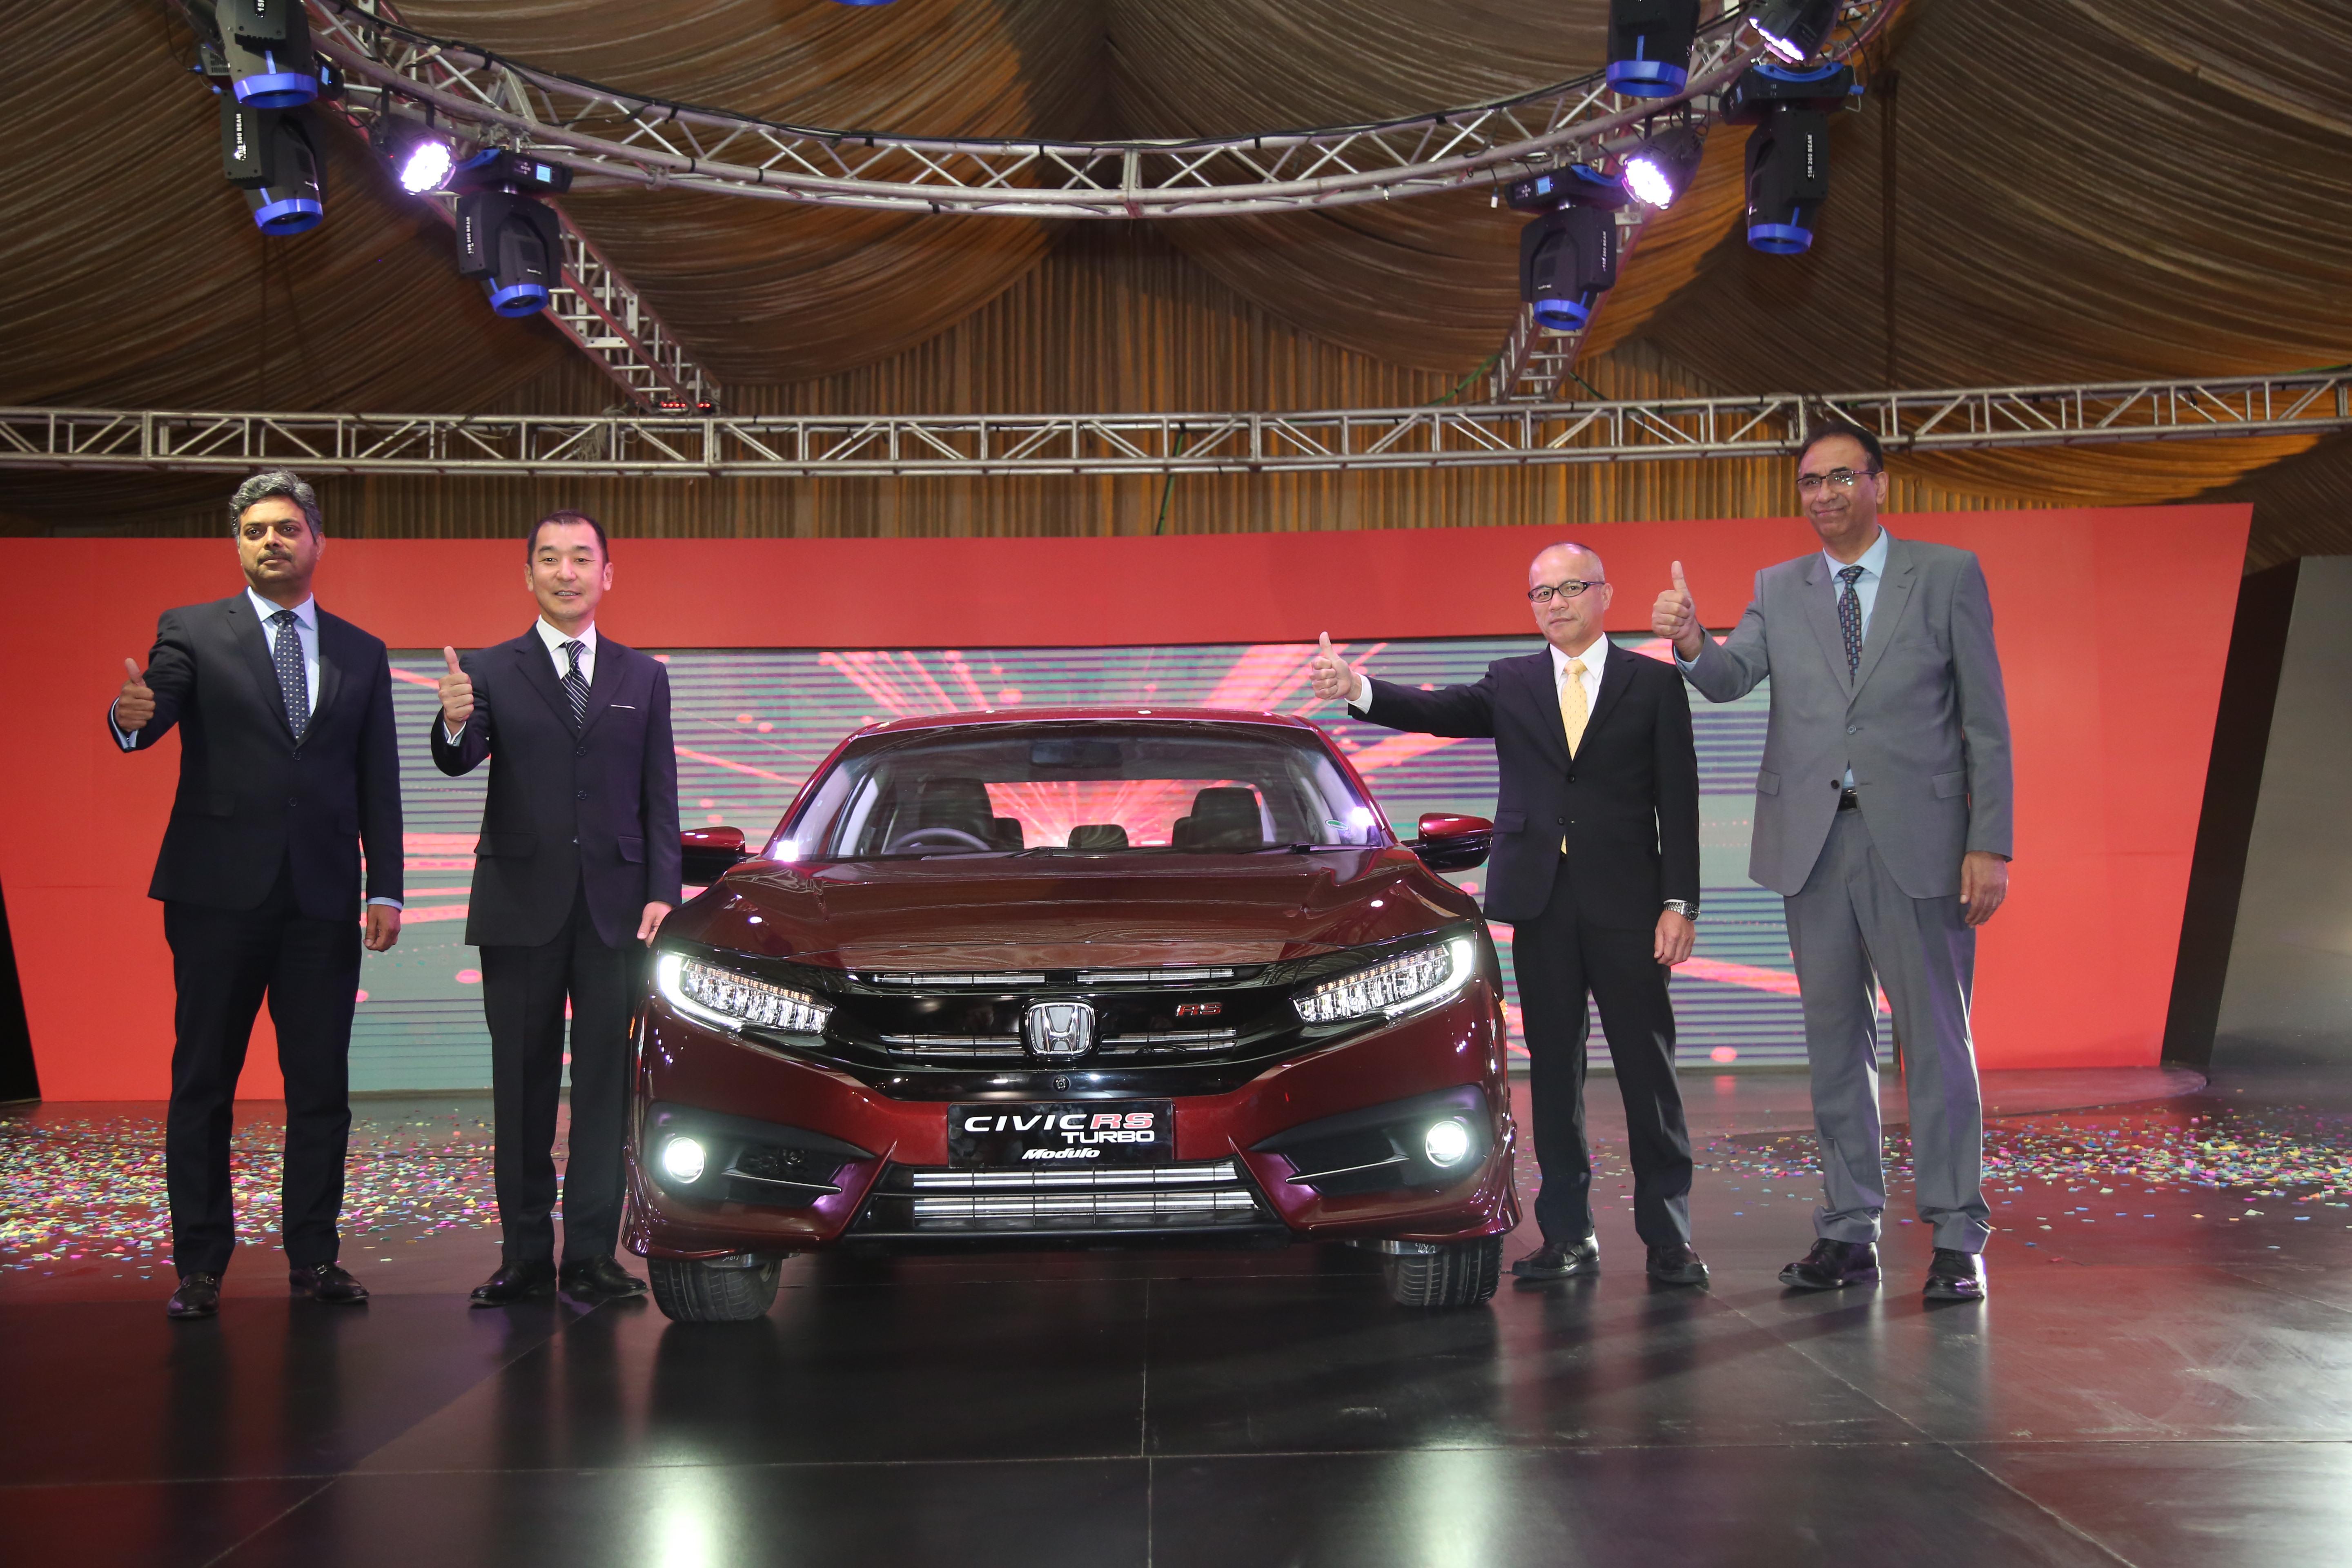 Honda Launches 10th generation Honda Civic – 2019 “Luxuriously Tailored for Comfort” for the Sedan Market in Pakistan